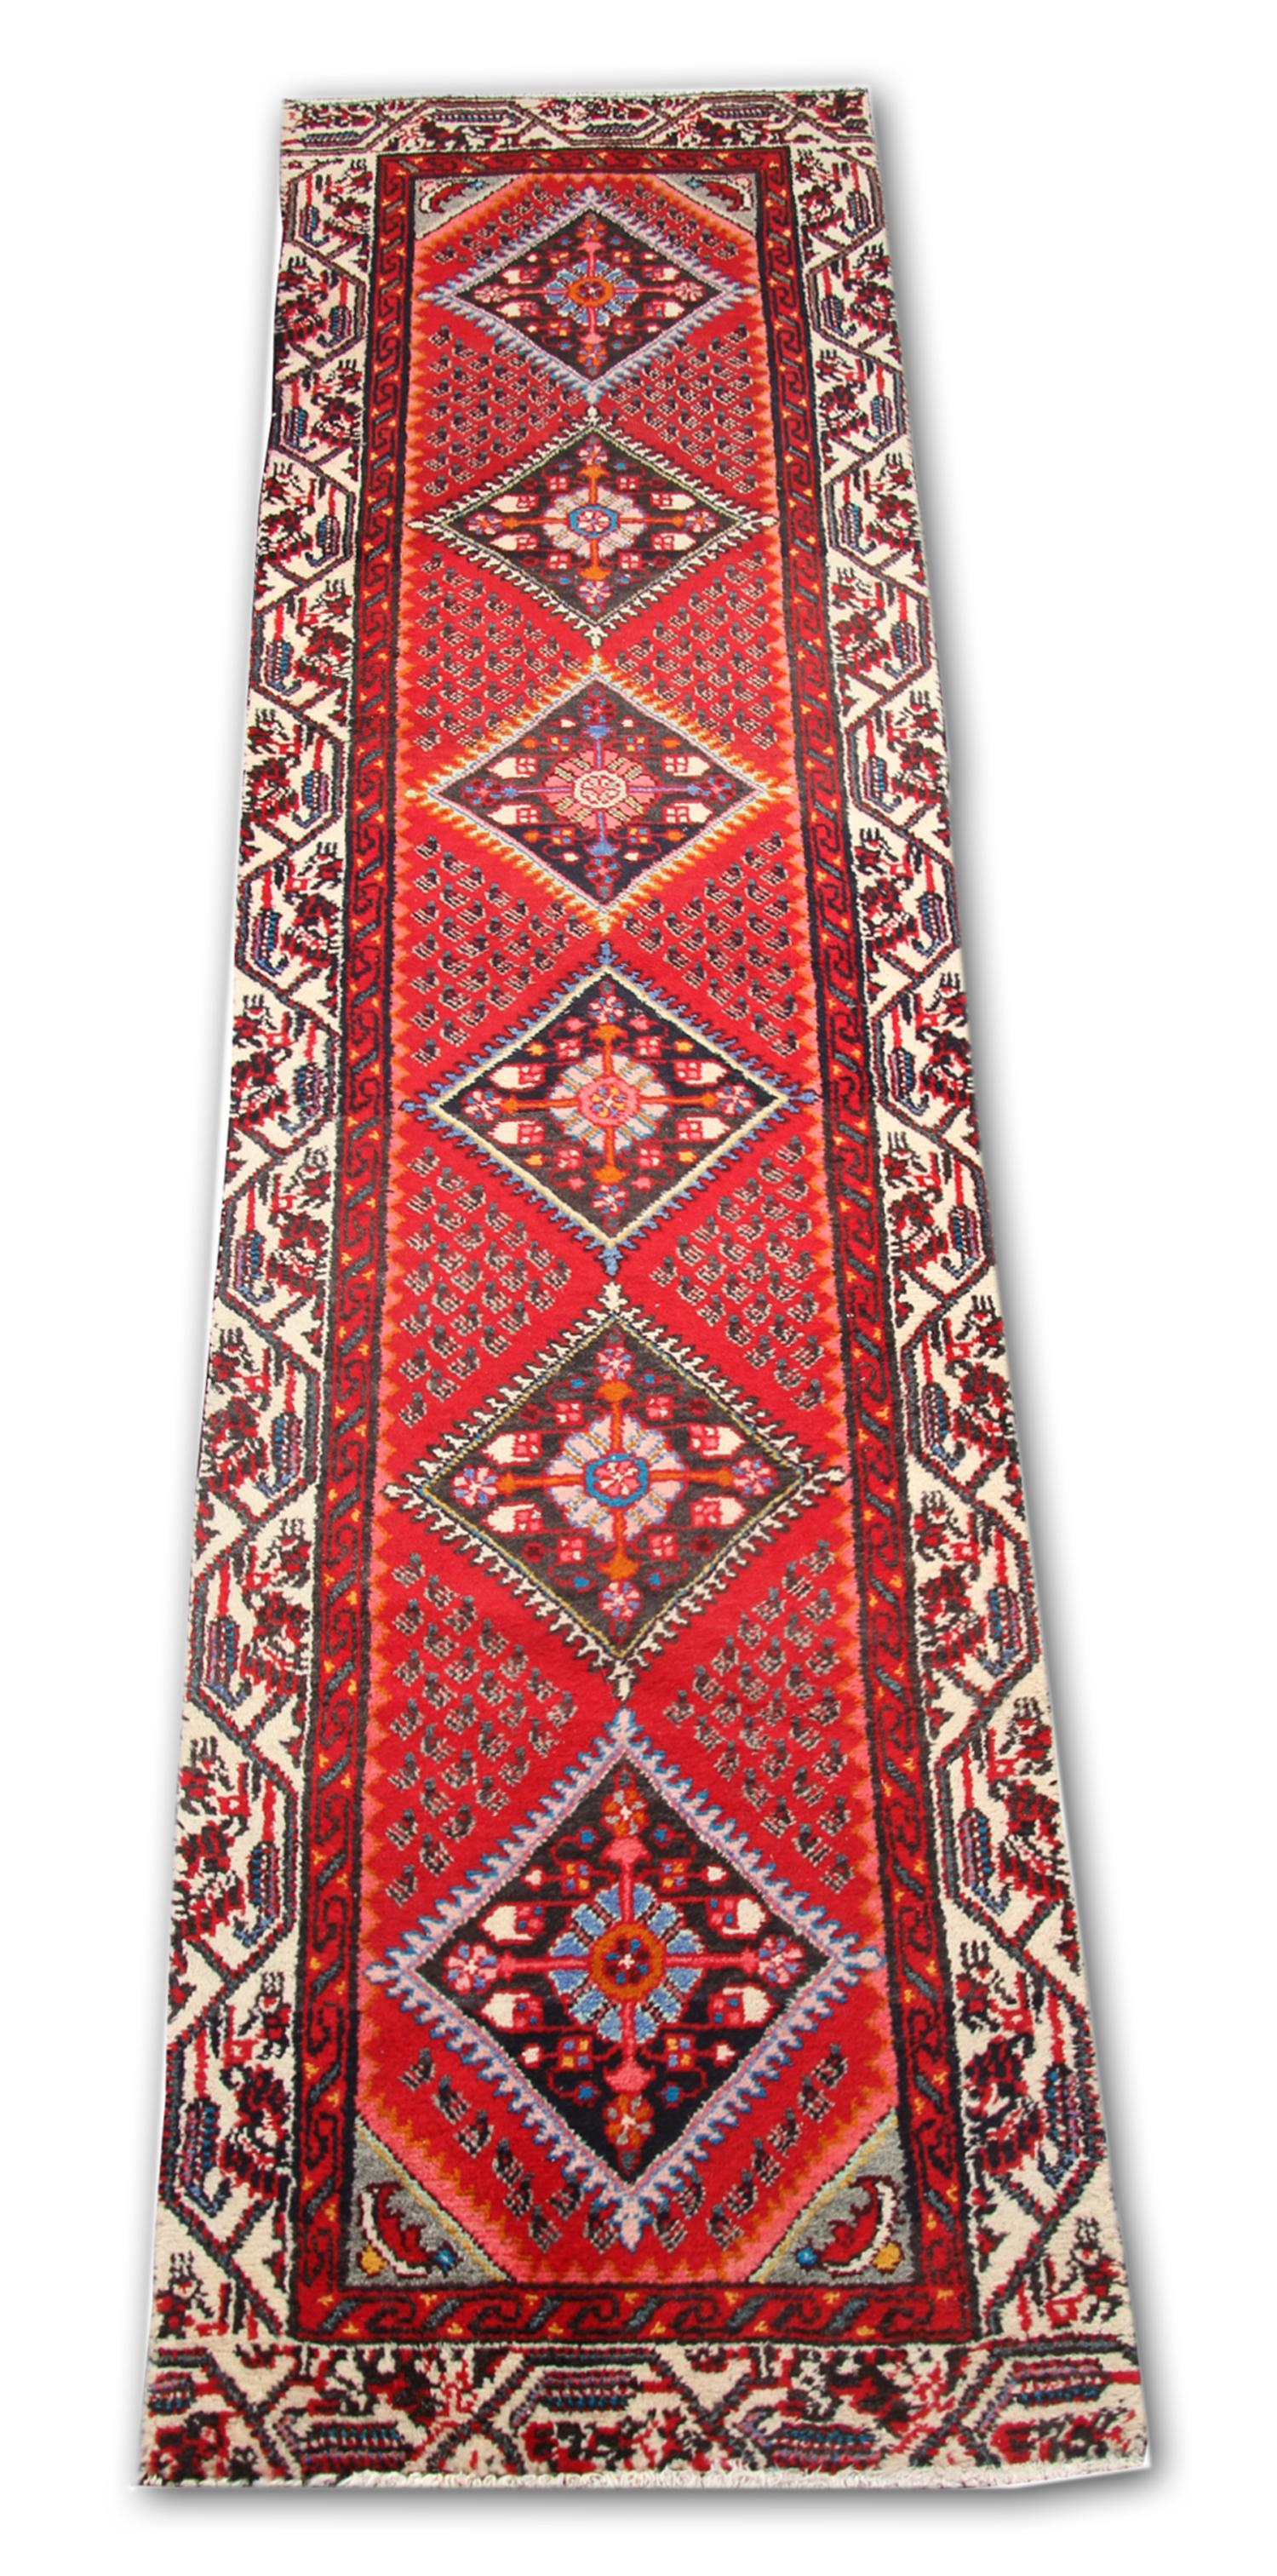 This vintage rug was constructed by hand with fine organic materials. Woven with a traditional design and colour palette. Featuring a rich red background and highly decorative medallion design through the centre and a repeat motif border. This